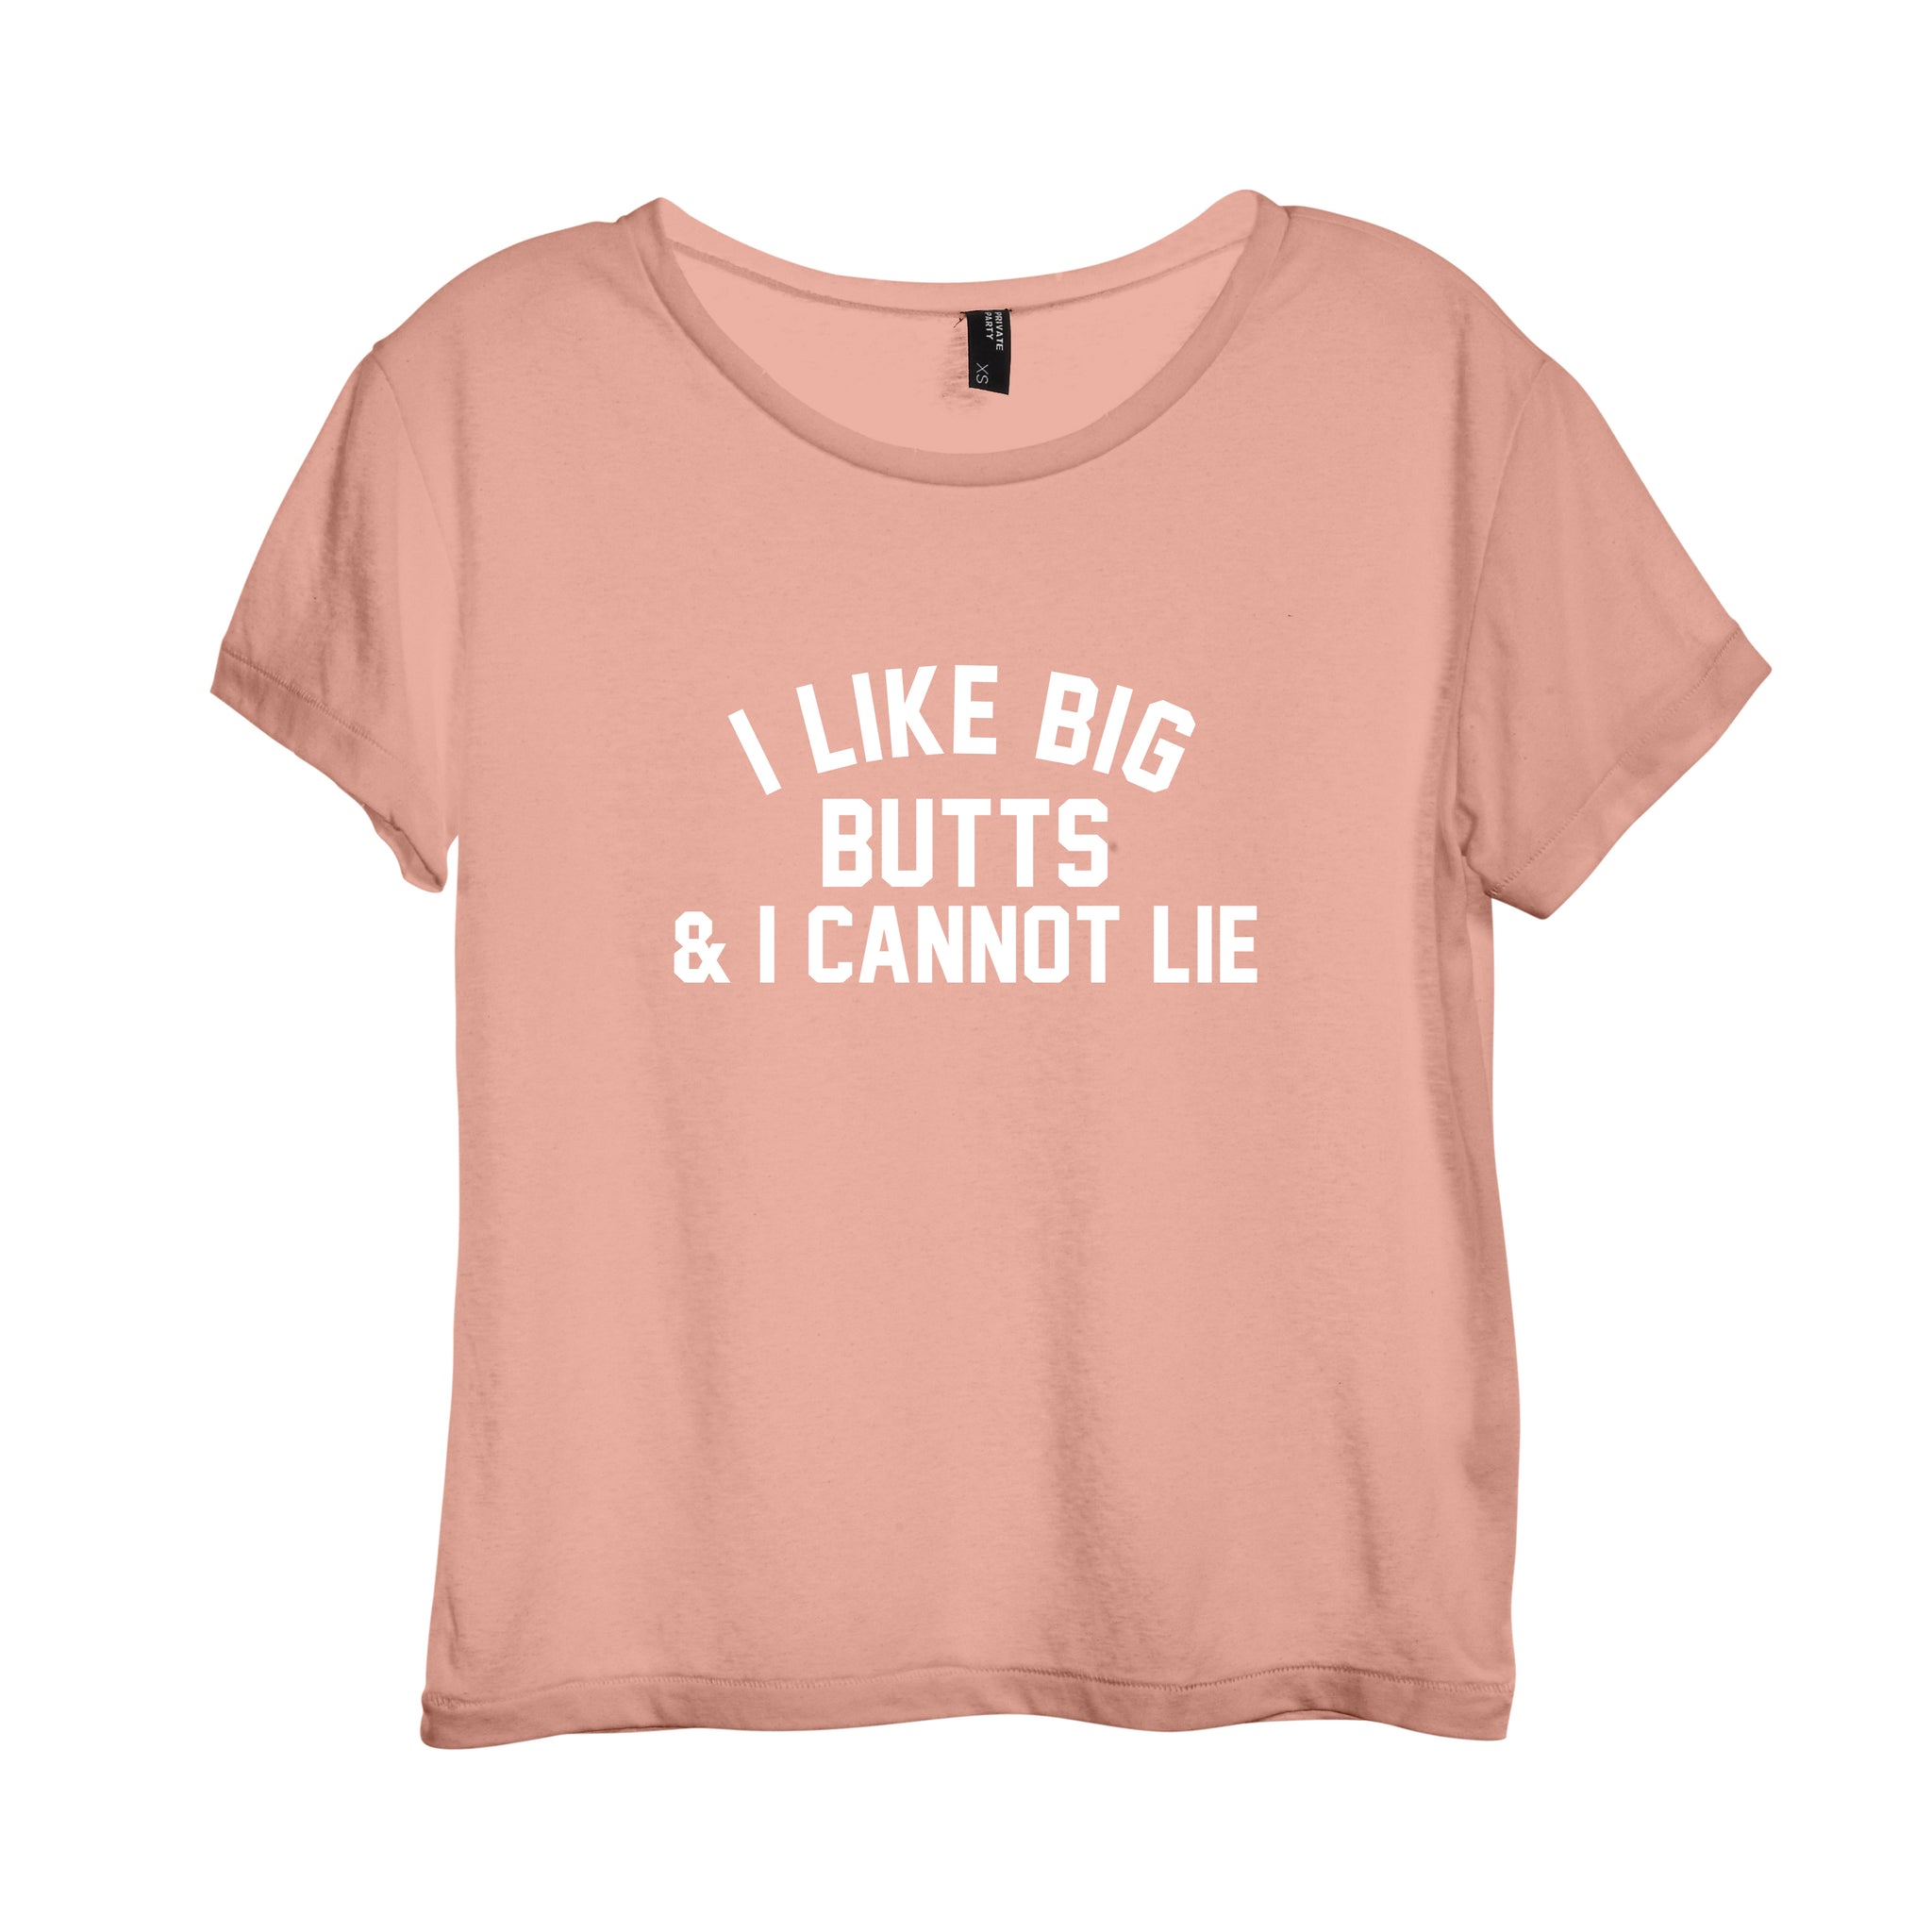 I LIKE BIG BUTTS & I CANNOT LIE [DISTRESSED WOMEN'S 'BABY TEE']